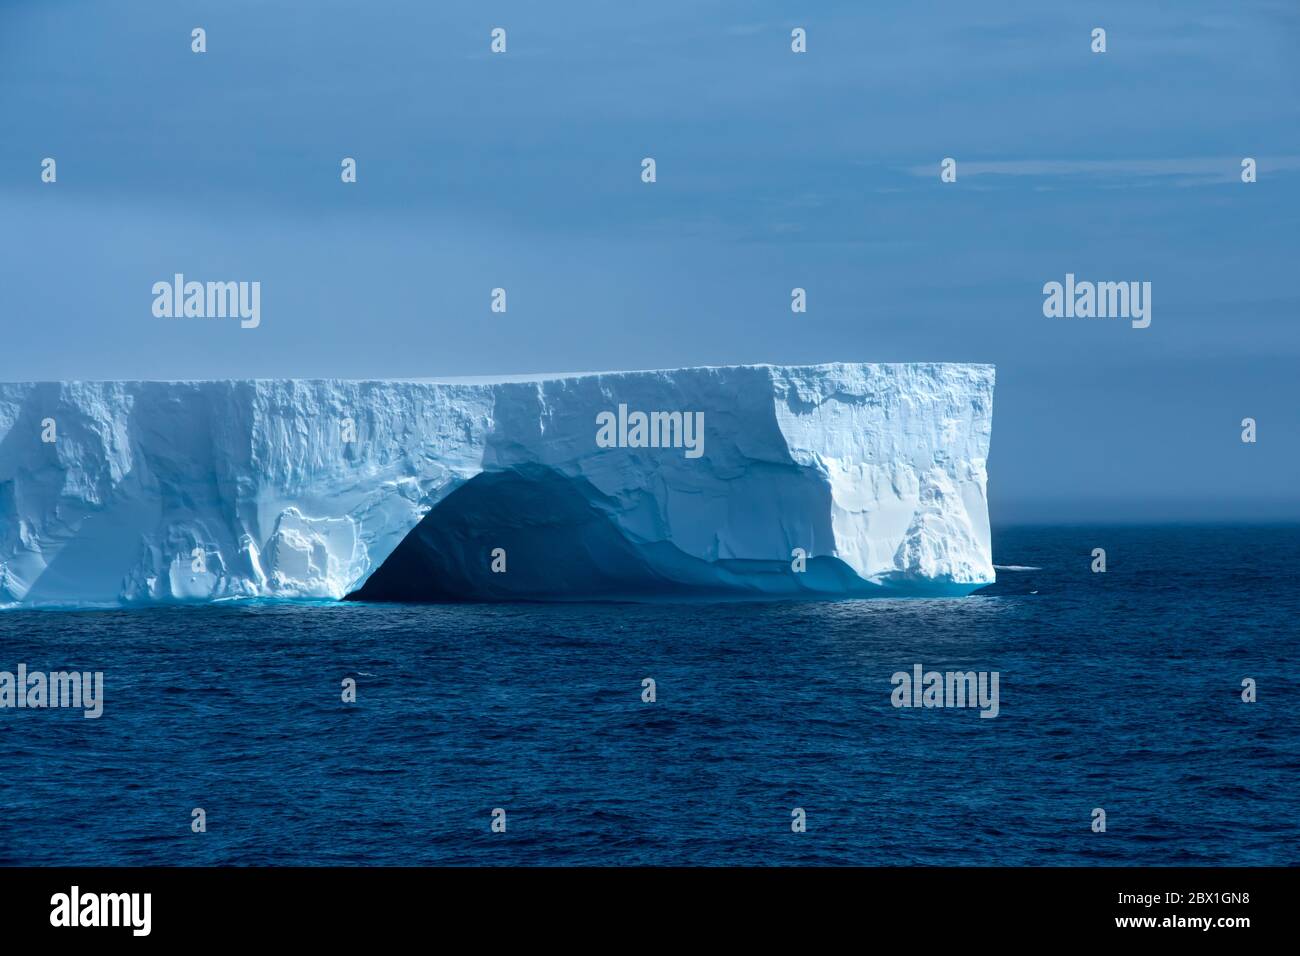 A large blue iceberg floating in Admiralty Bay, Antarctica. Stock Photo